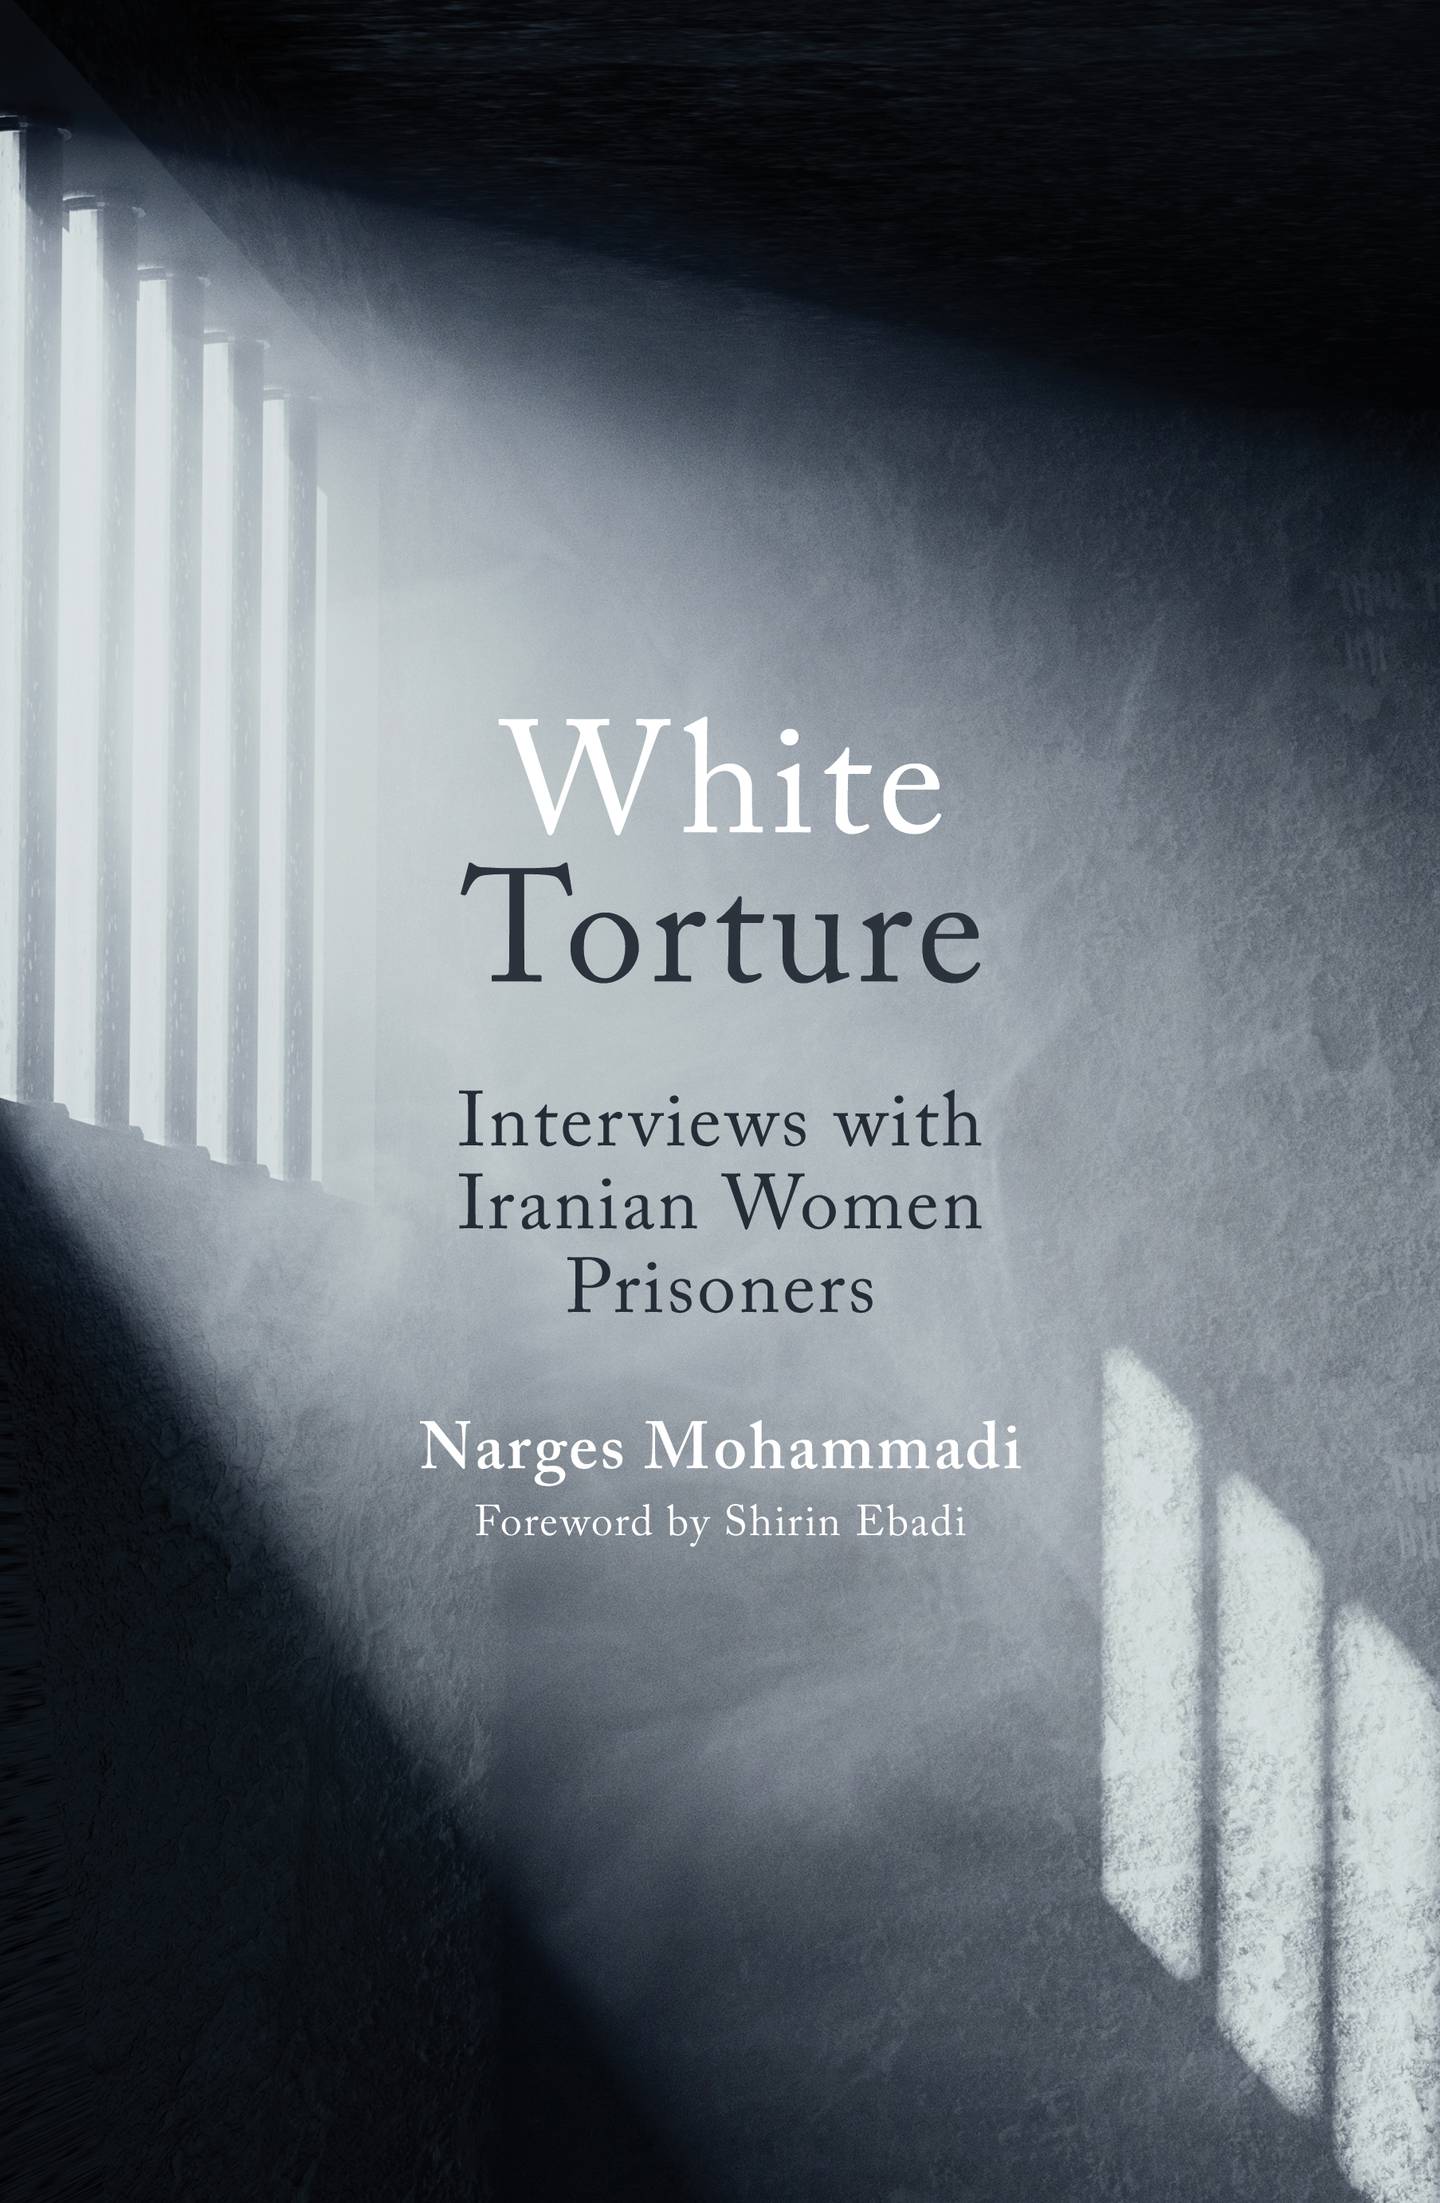 'White Torture: Interviews with Iranian Women Prisoners' by Narges Mohammadi. Photo: OneWorld Publications